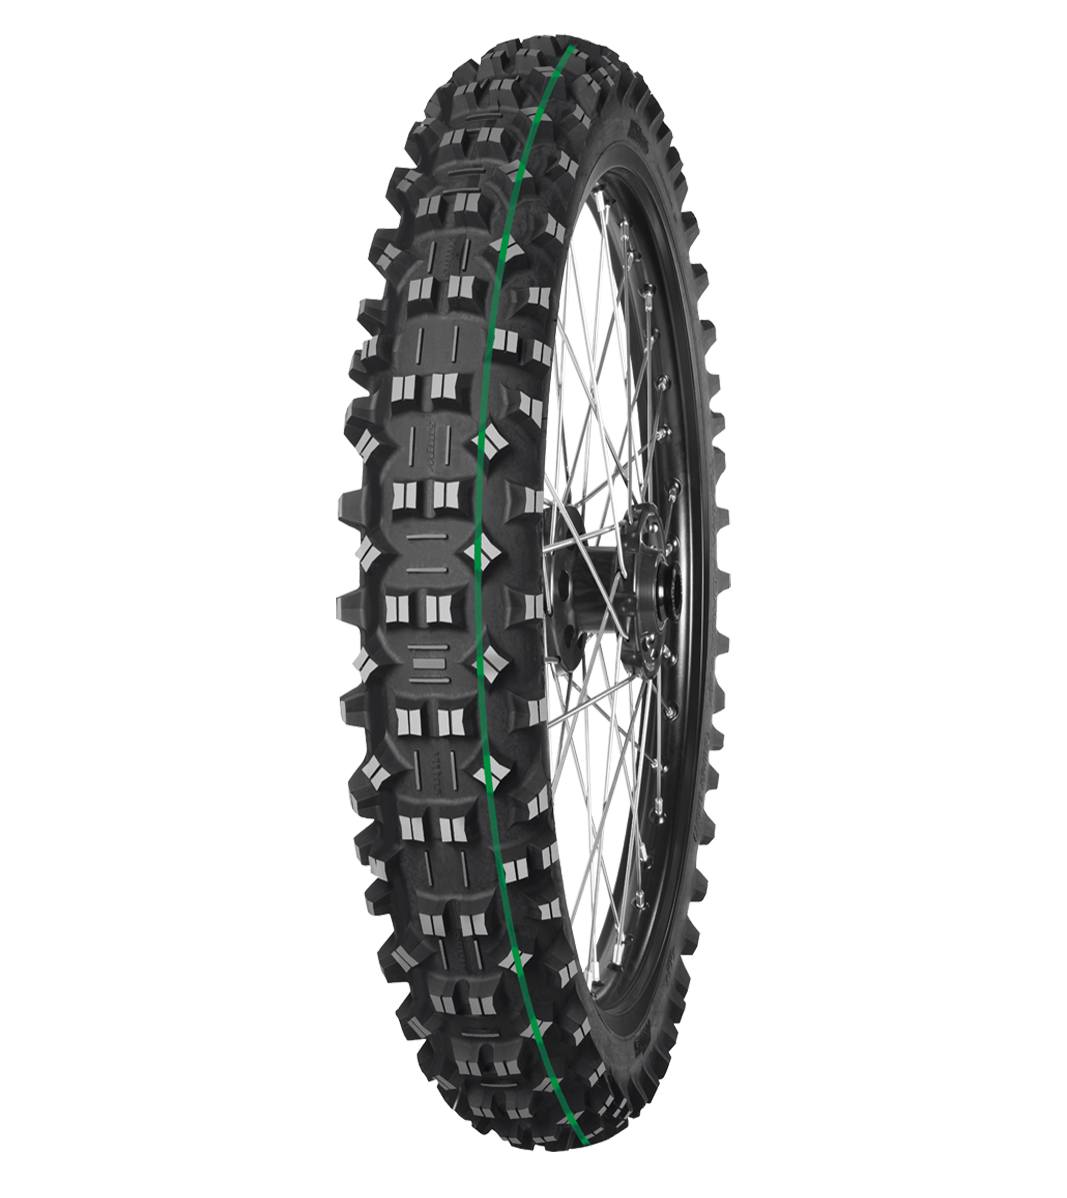 Mitas TERRA FORCE-EF 90/100-21 Enduro Competition Off-Road SUPER LIGHT 57R Green Tube Front Tire, 226744, 90/100-21, Enduro Competition, Front, Off-Road, Terra Force, Terra Force-EF, Trail, Tires - Imported and distributed in North & South America by Lindeco Genuine Powersports - Premier Powersports Equipment and Accessories for Motorcycle Enthusiasts, Professional Riders and Dealers.